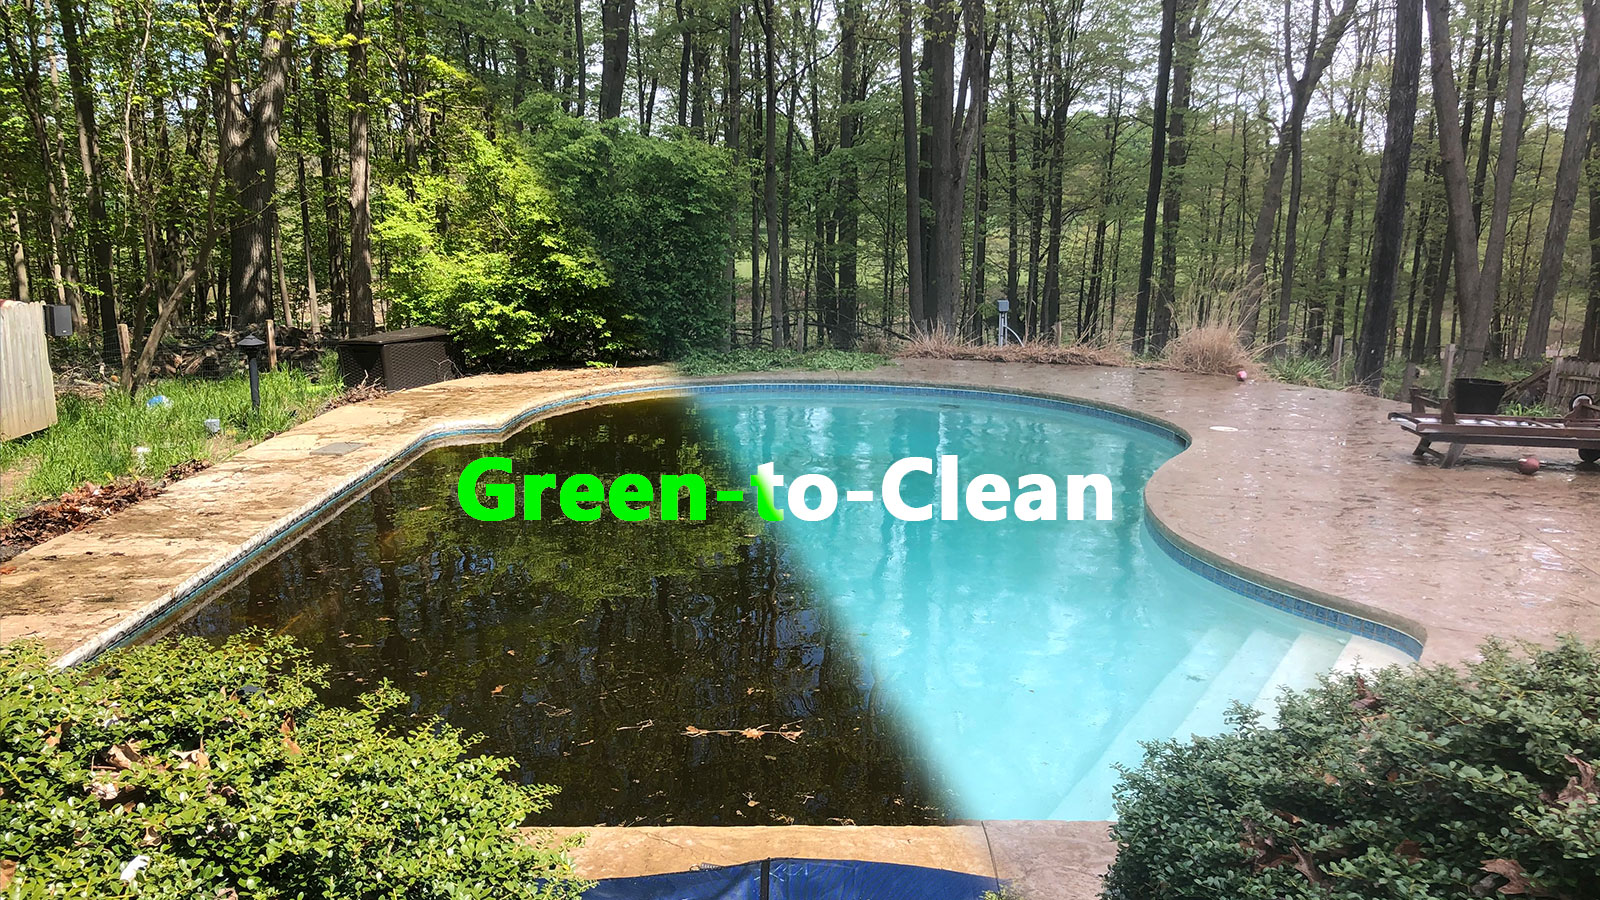 Green-to-Clean